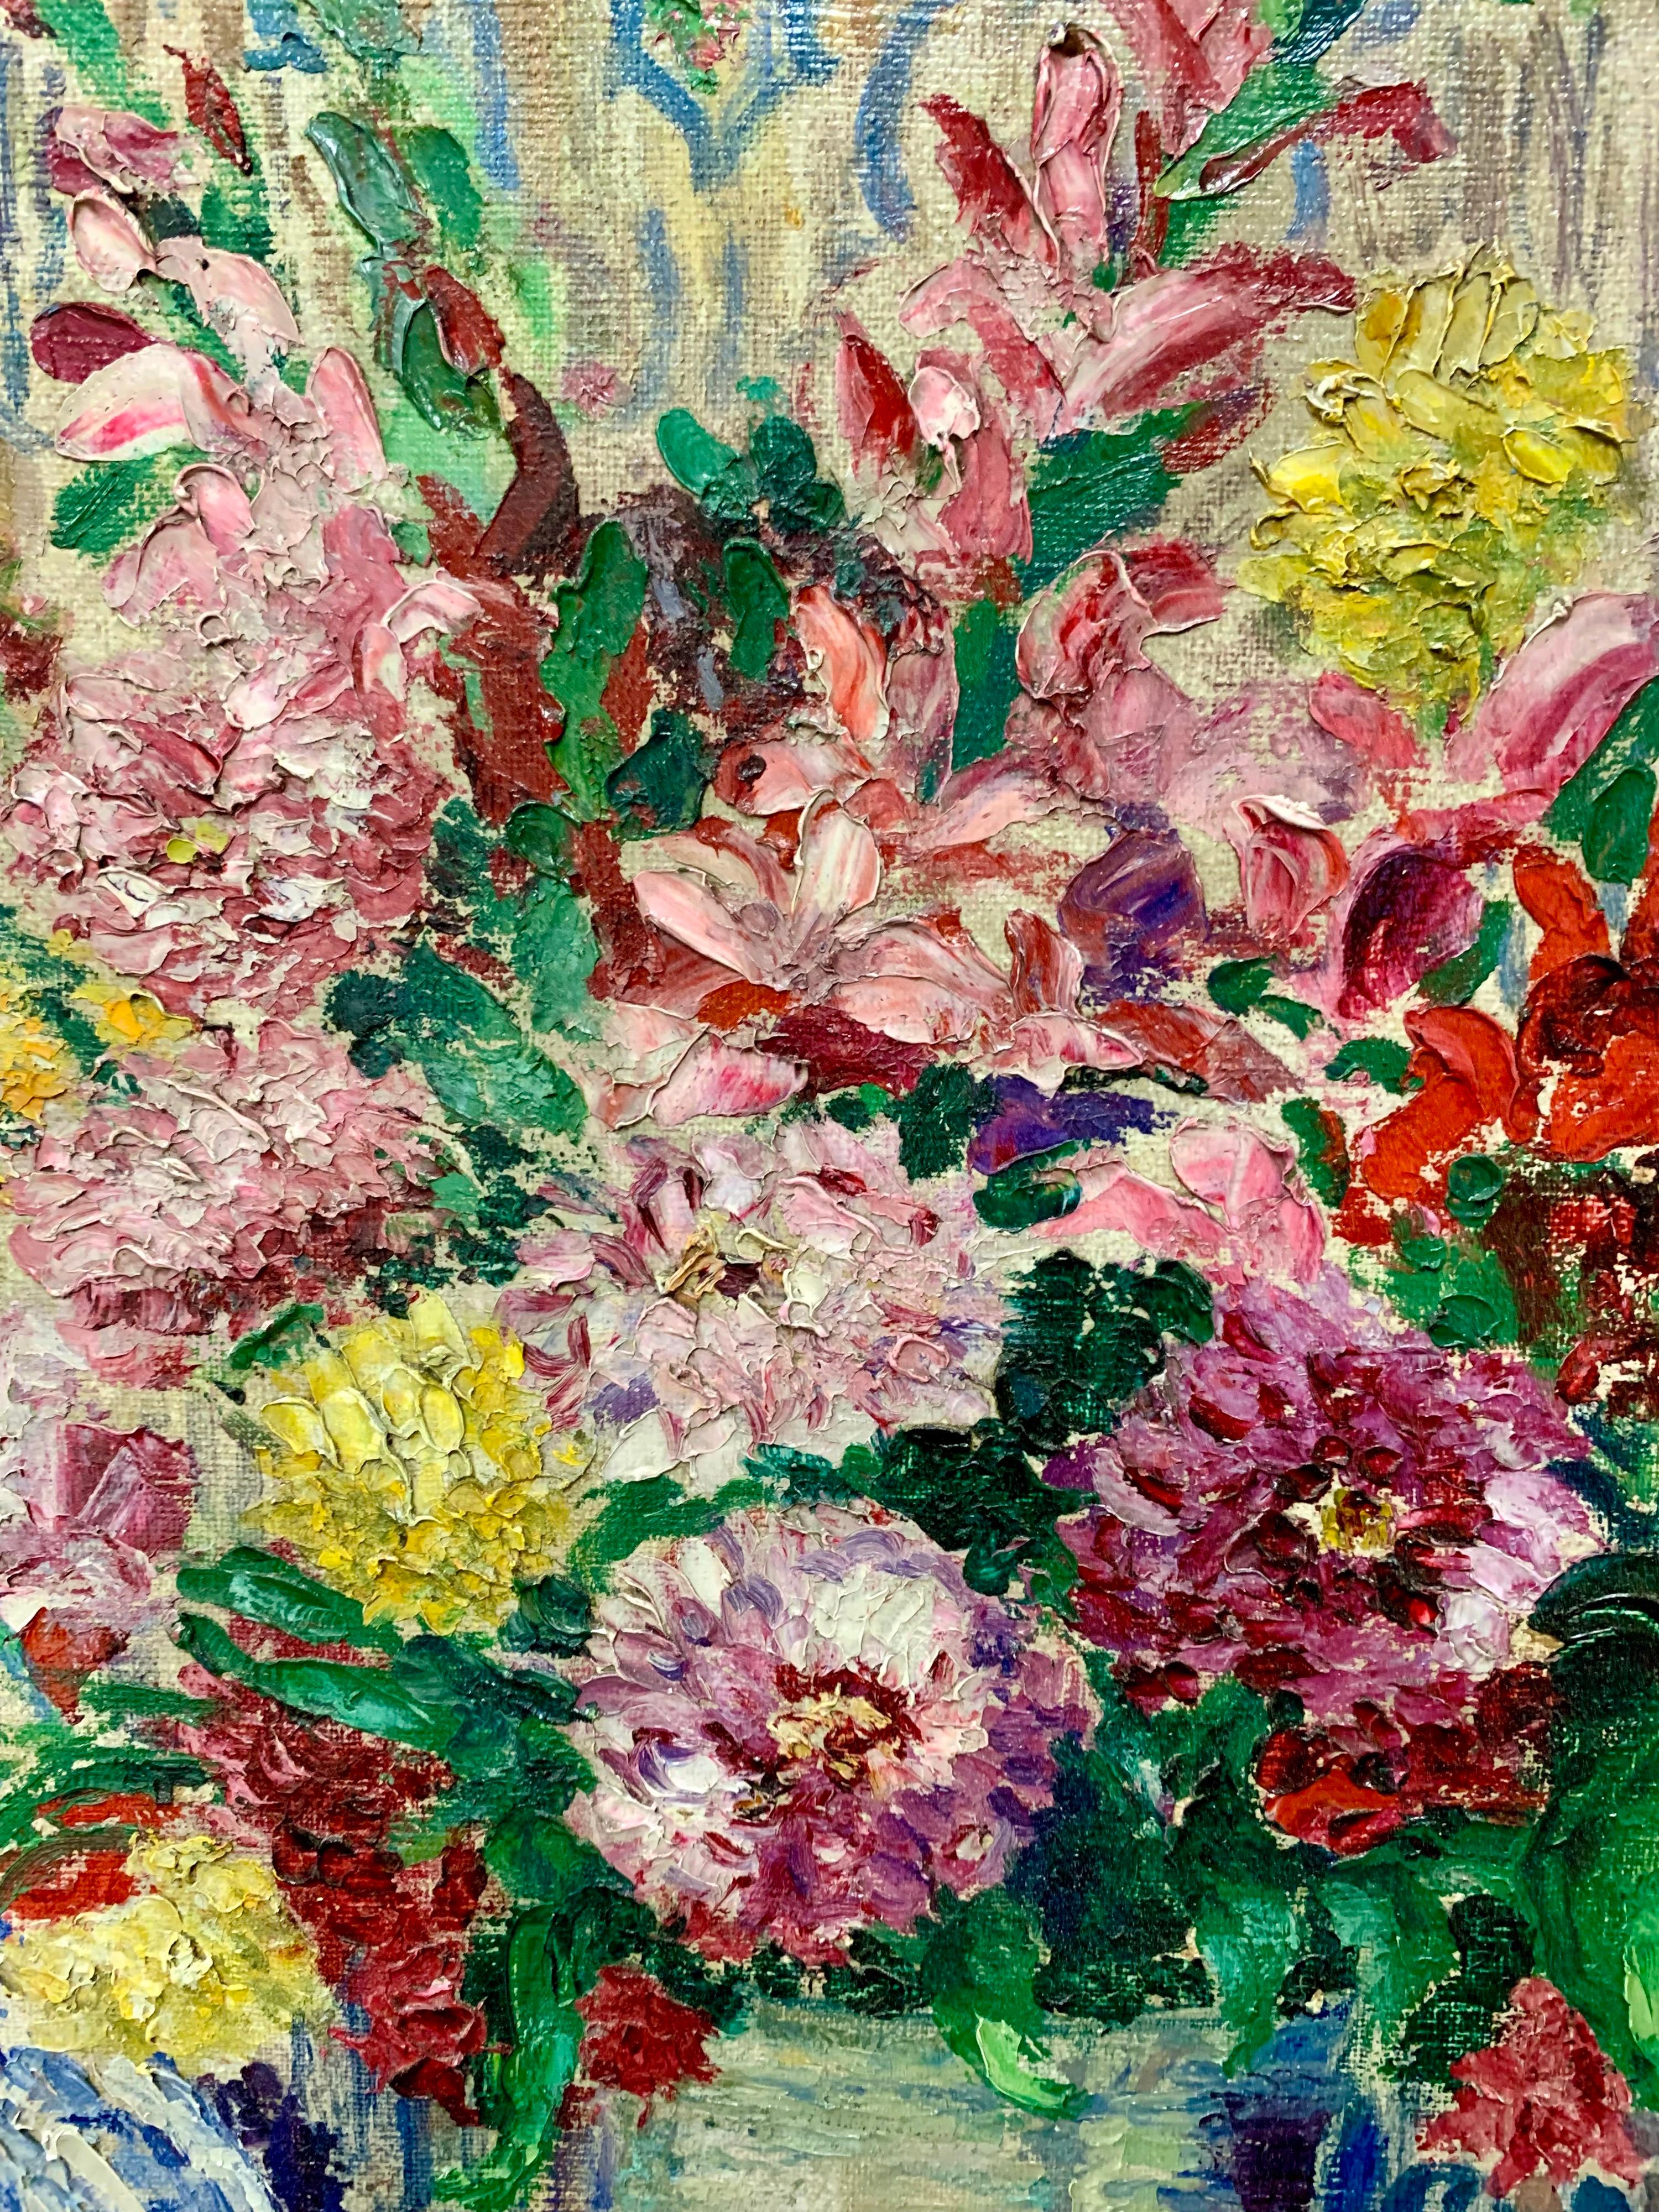 Large exquisite floral still life painting with a loose and painterly impressionistic style, with confident brush strokes and a respect for underlying form and a palette of warm, saturated colors. Signed illegibly lower right (looks like RM Pent)